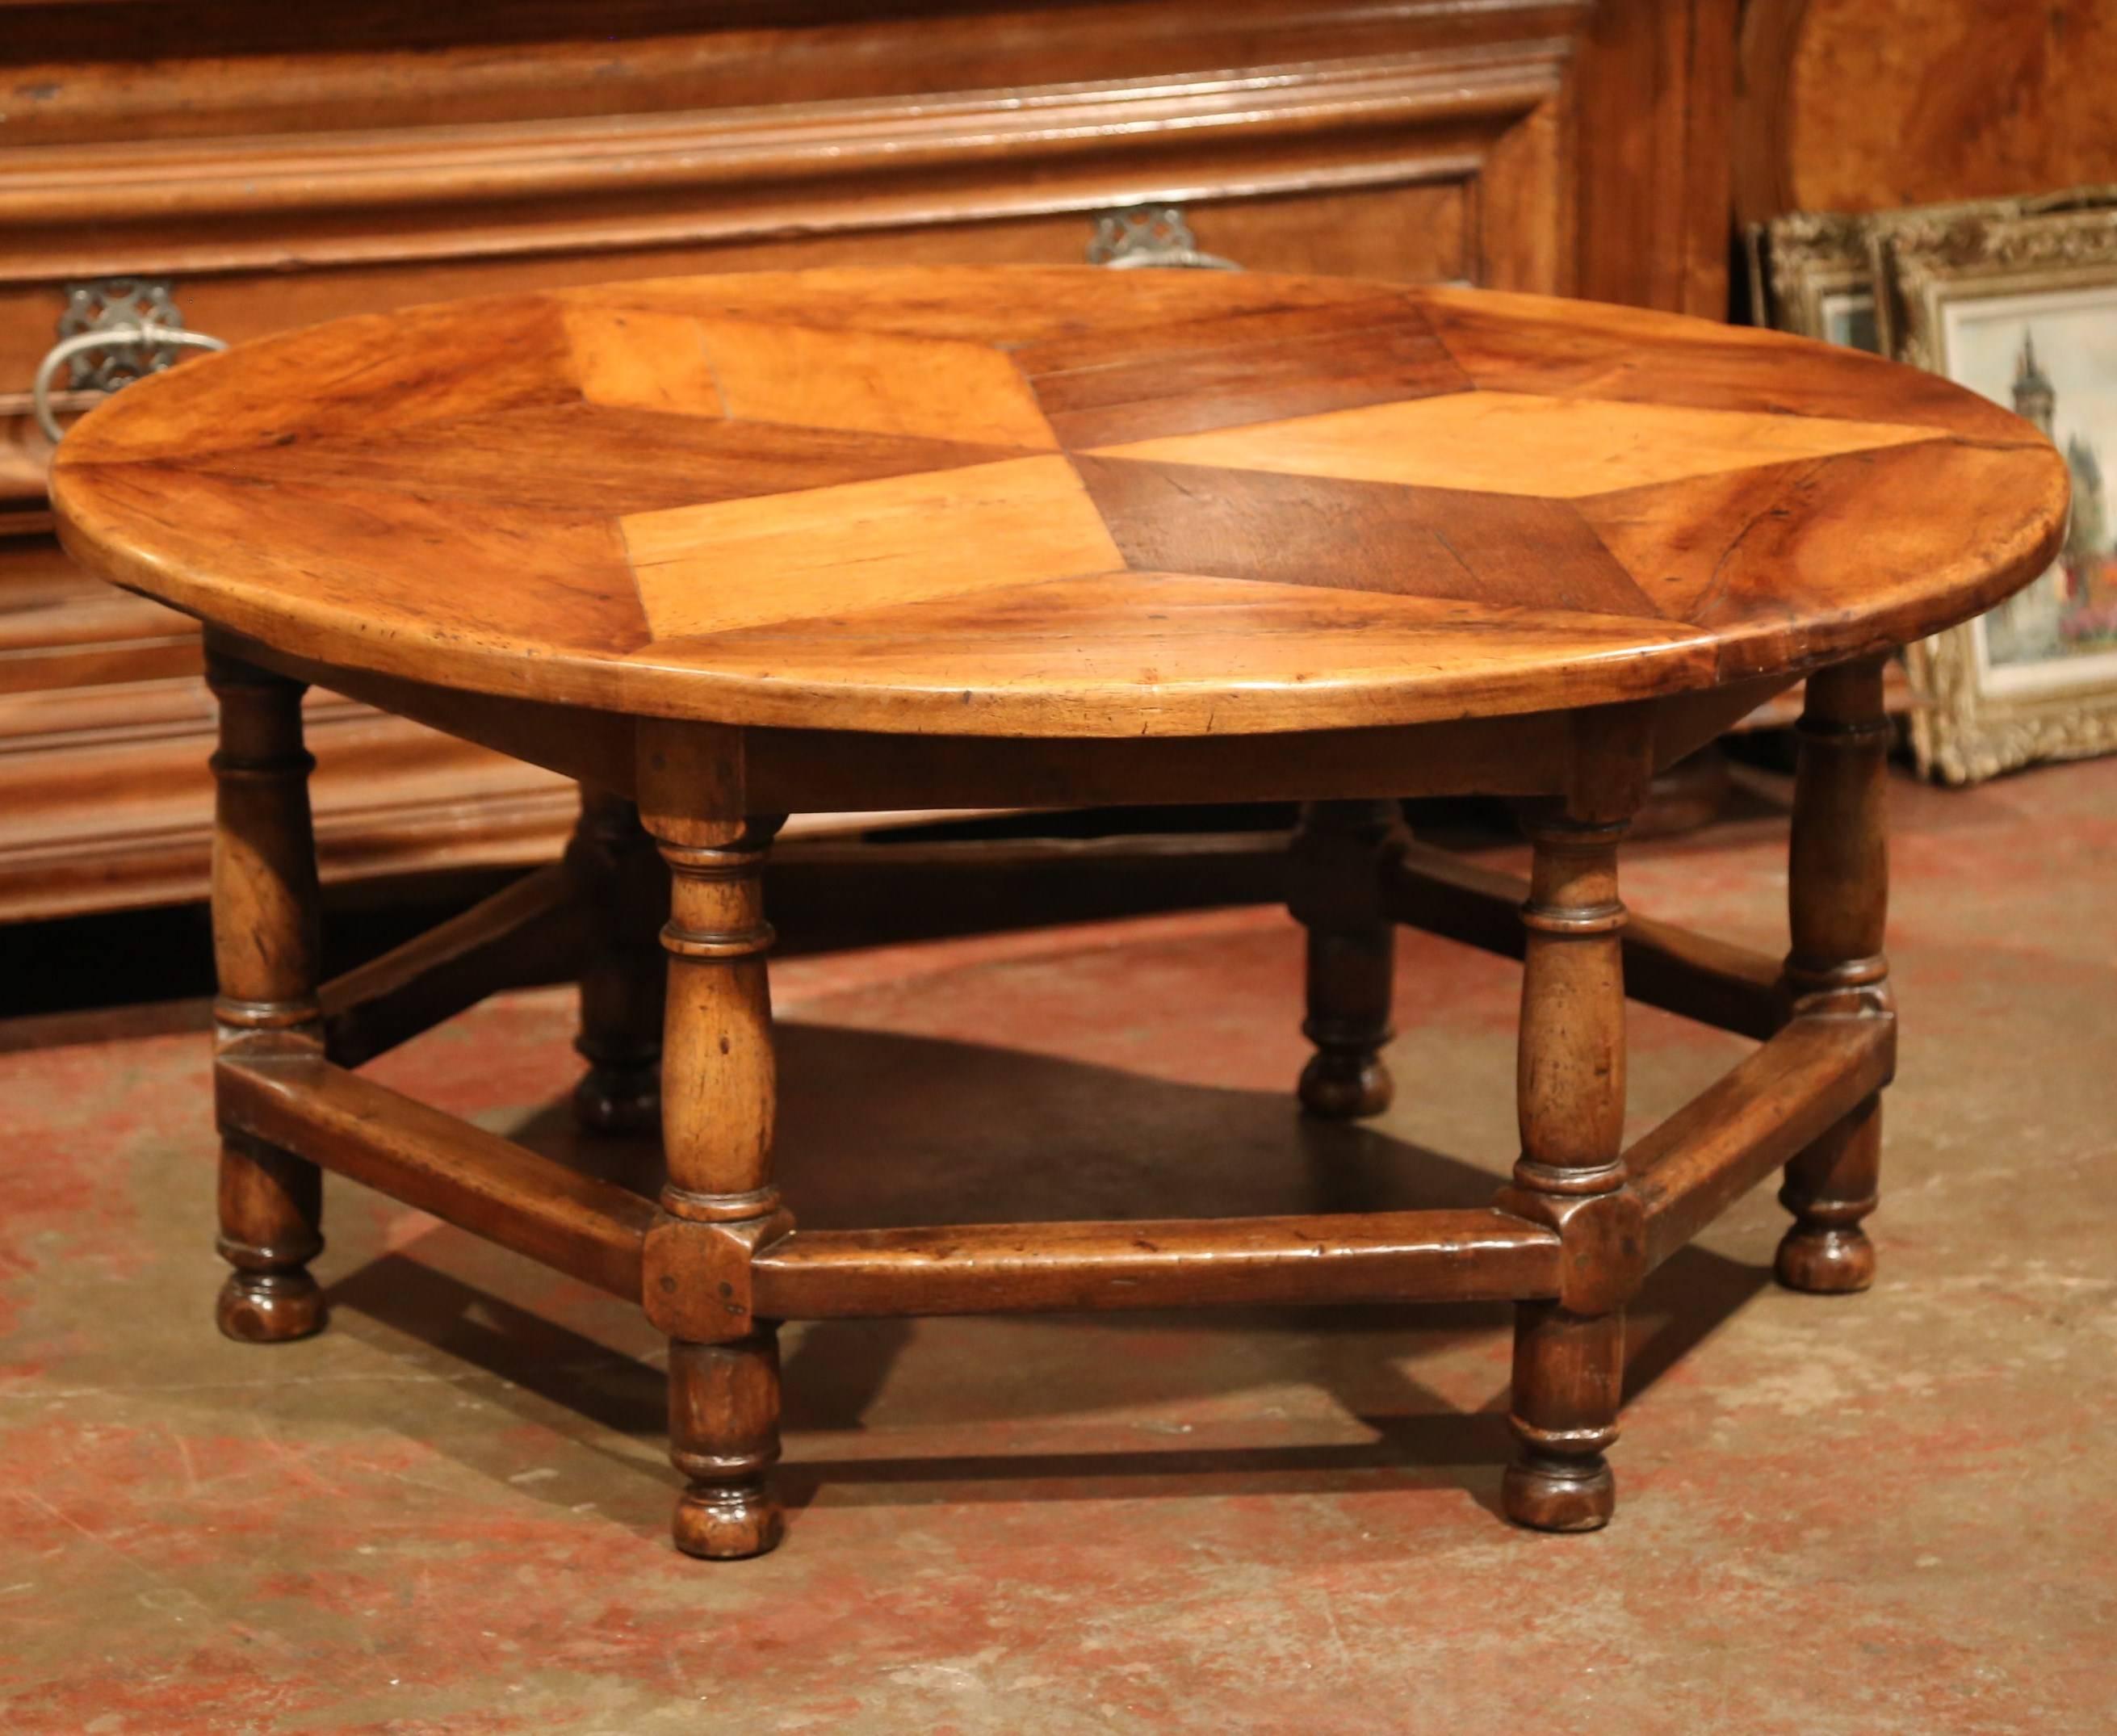 Cherry Midcentury French Six-Leg Round Coffee Table with Geometric Parquet Top